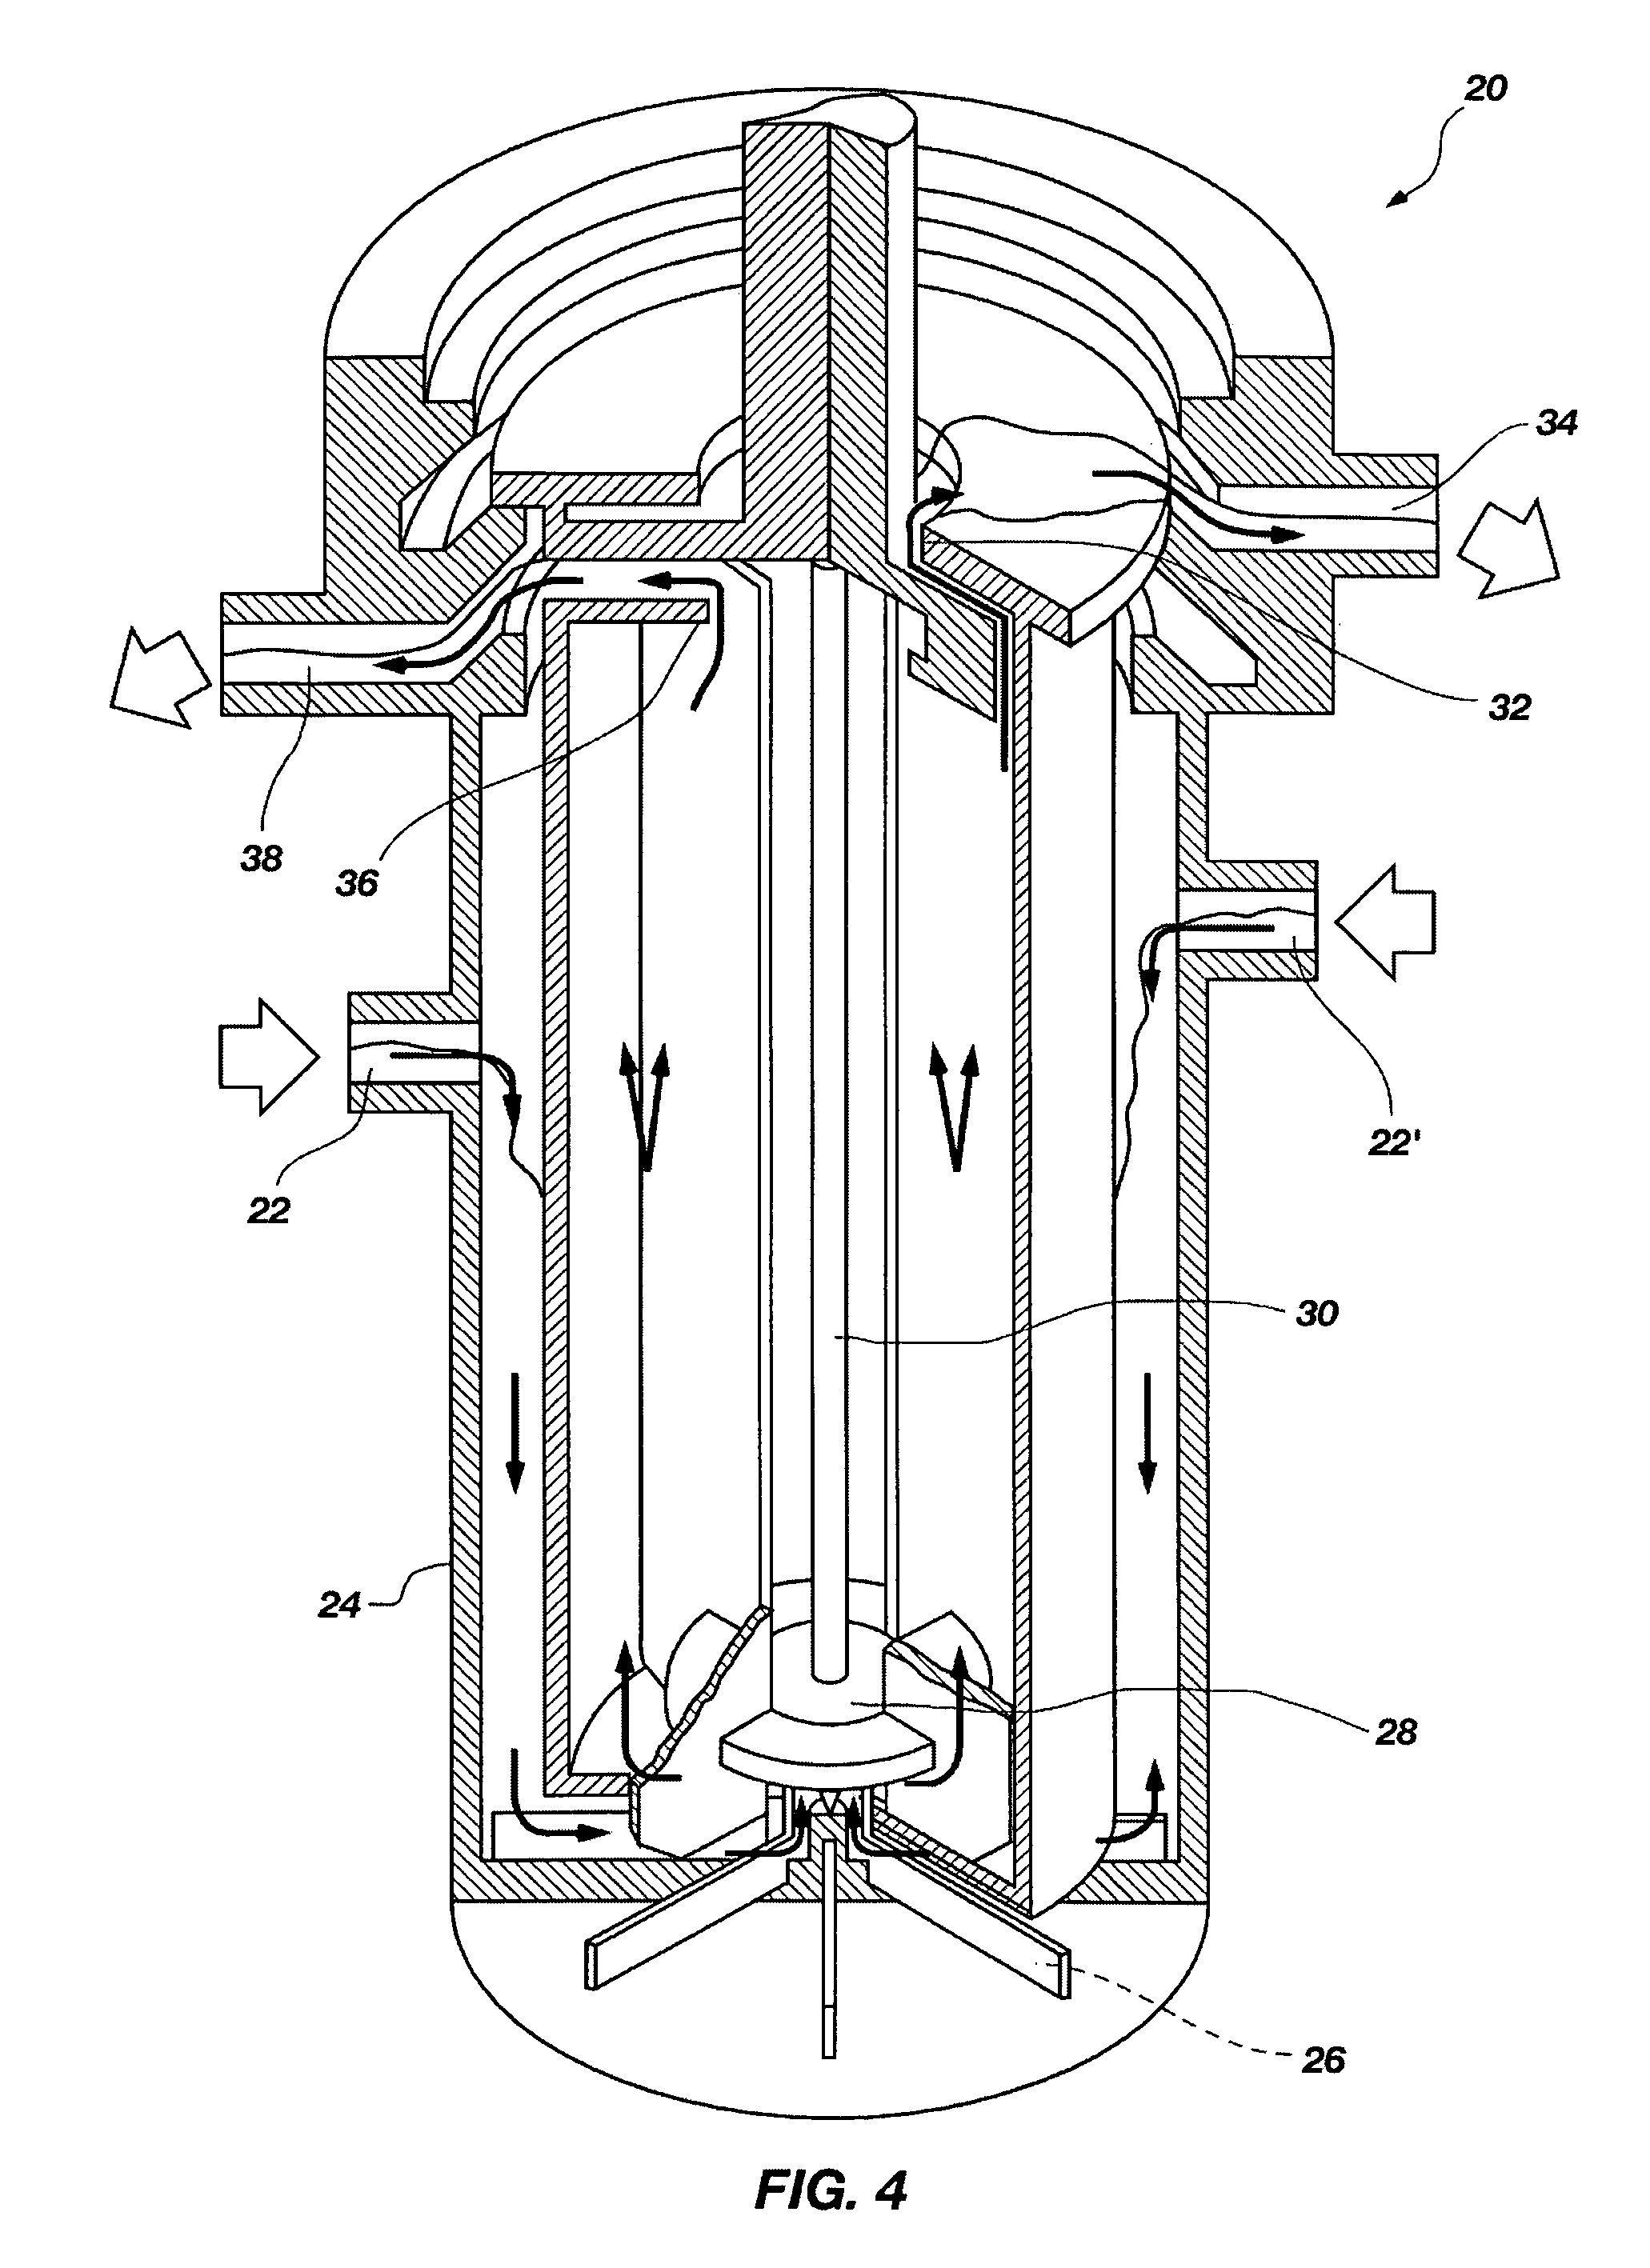 Process for radioisotope recovery and system for implementing same